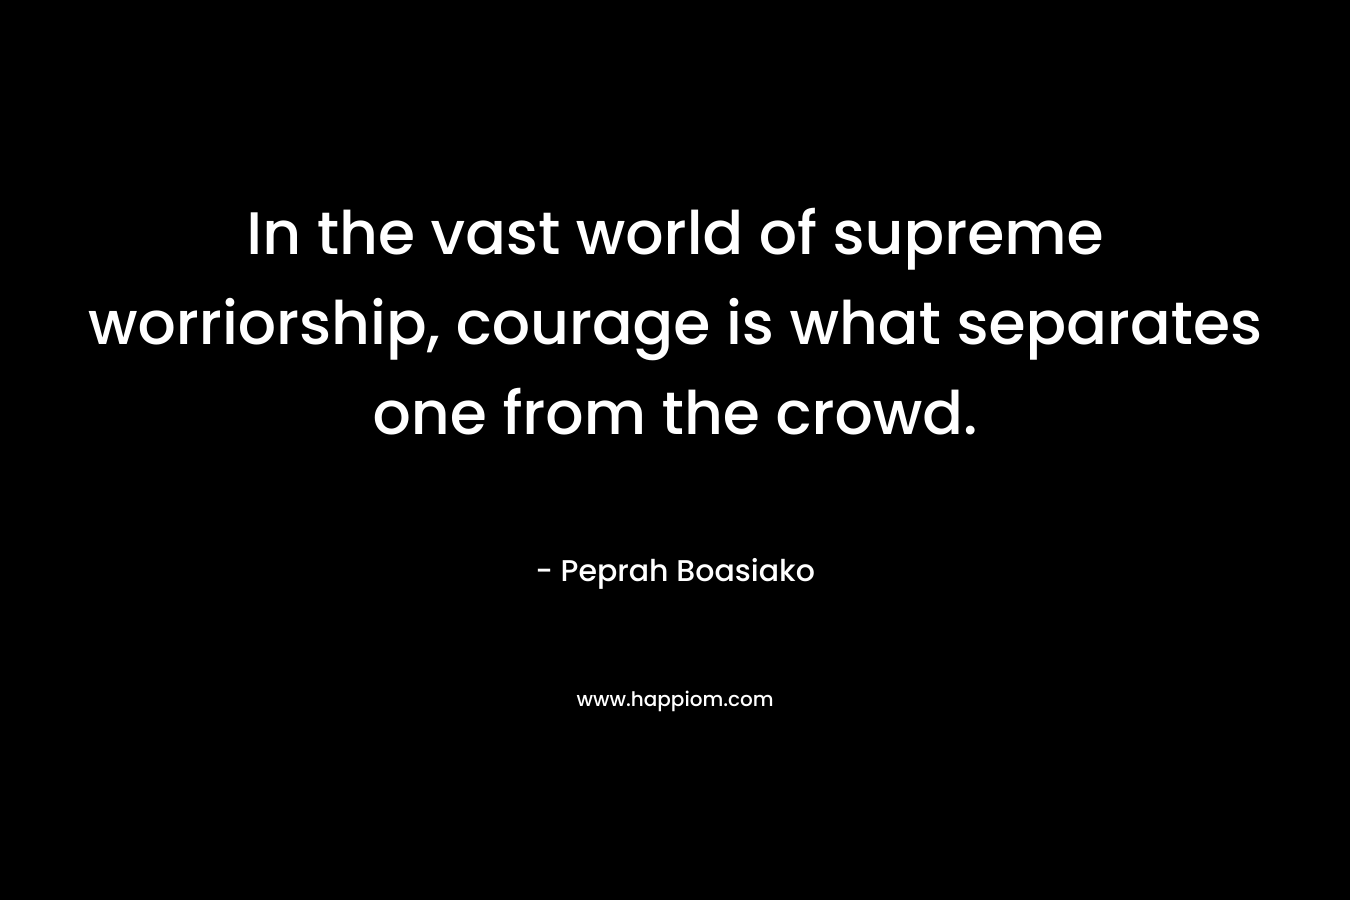 In the vast world of supreme worriorship, courage is what separates one from the crowd. – Peprah Boasiako